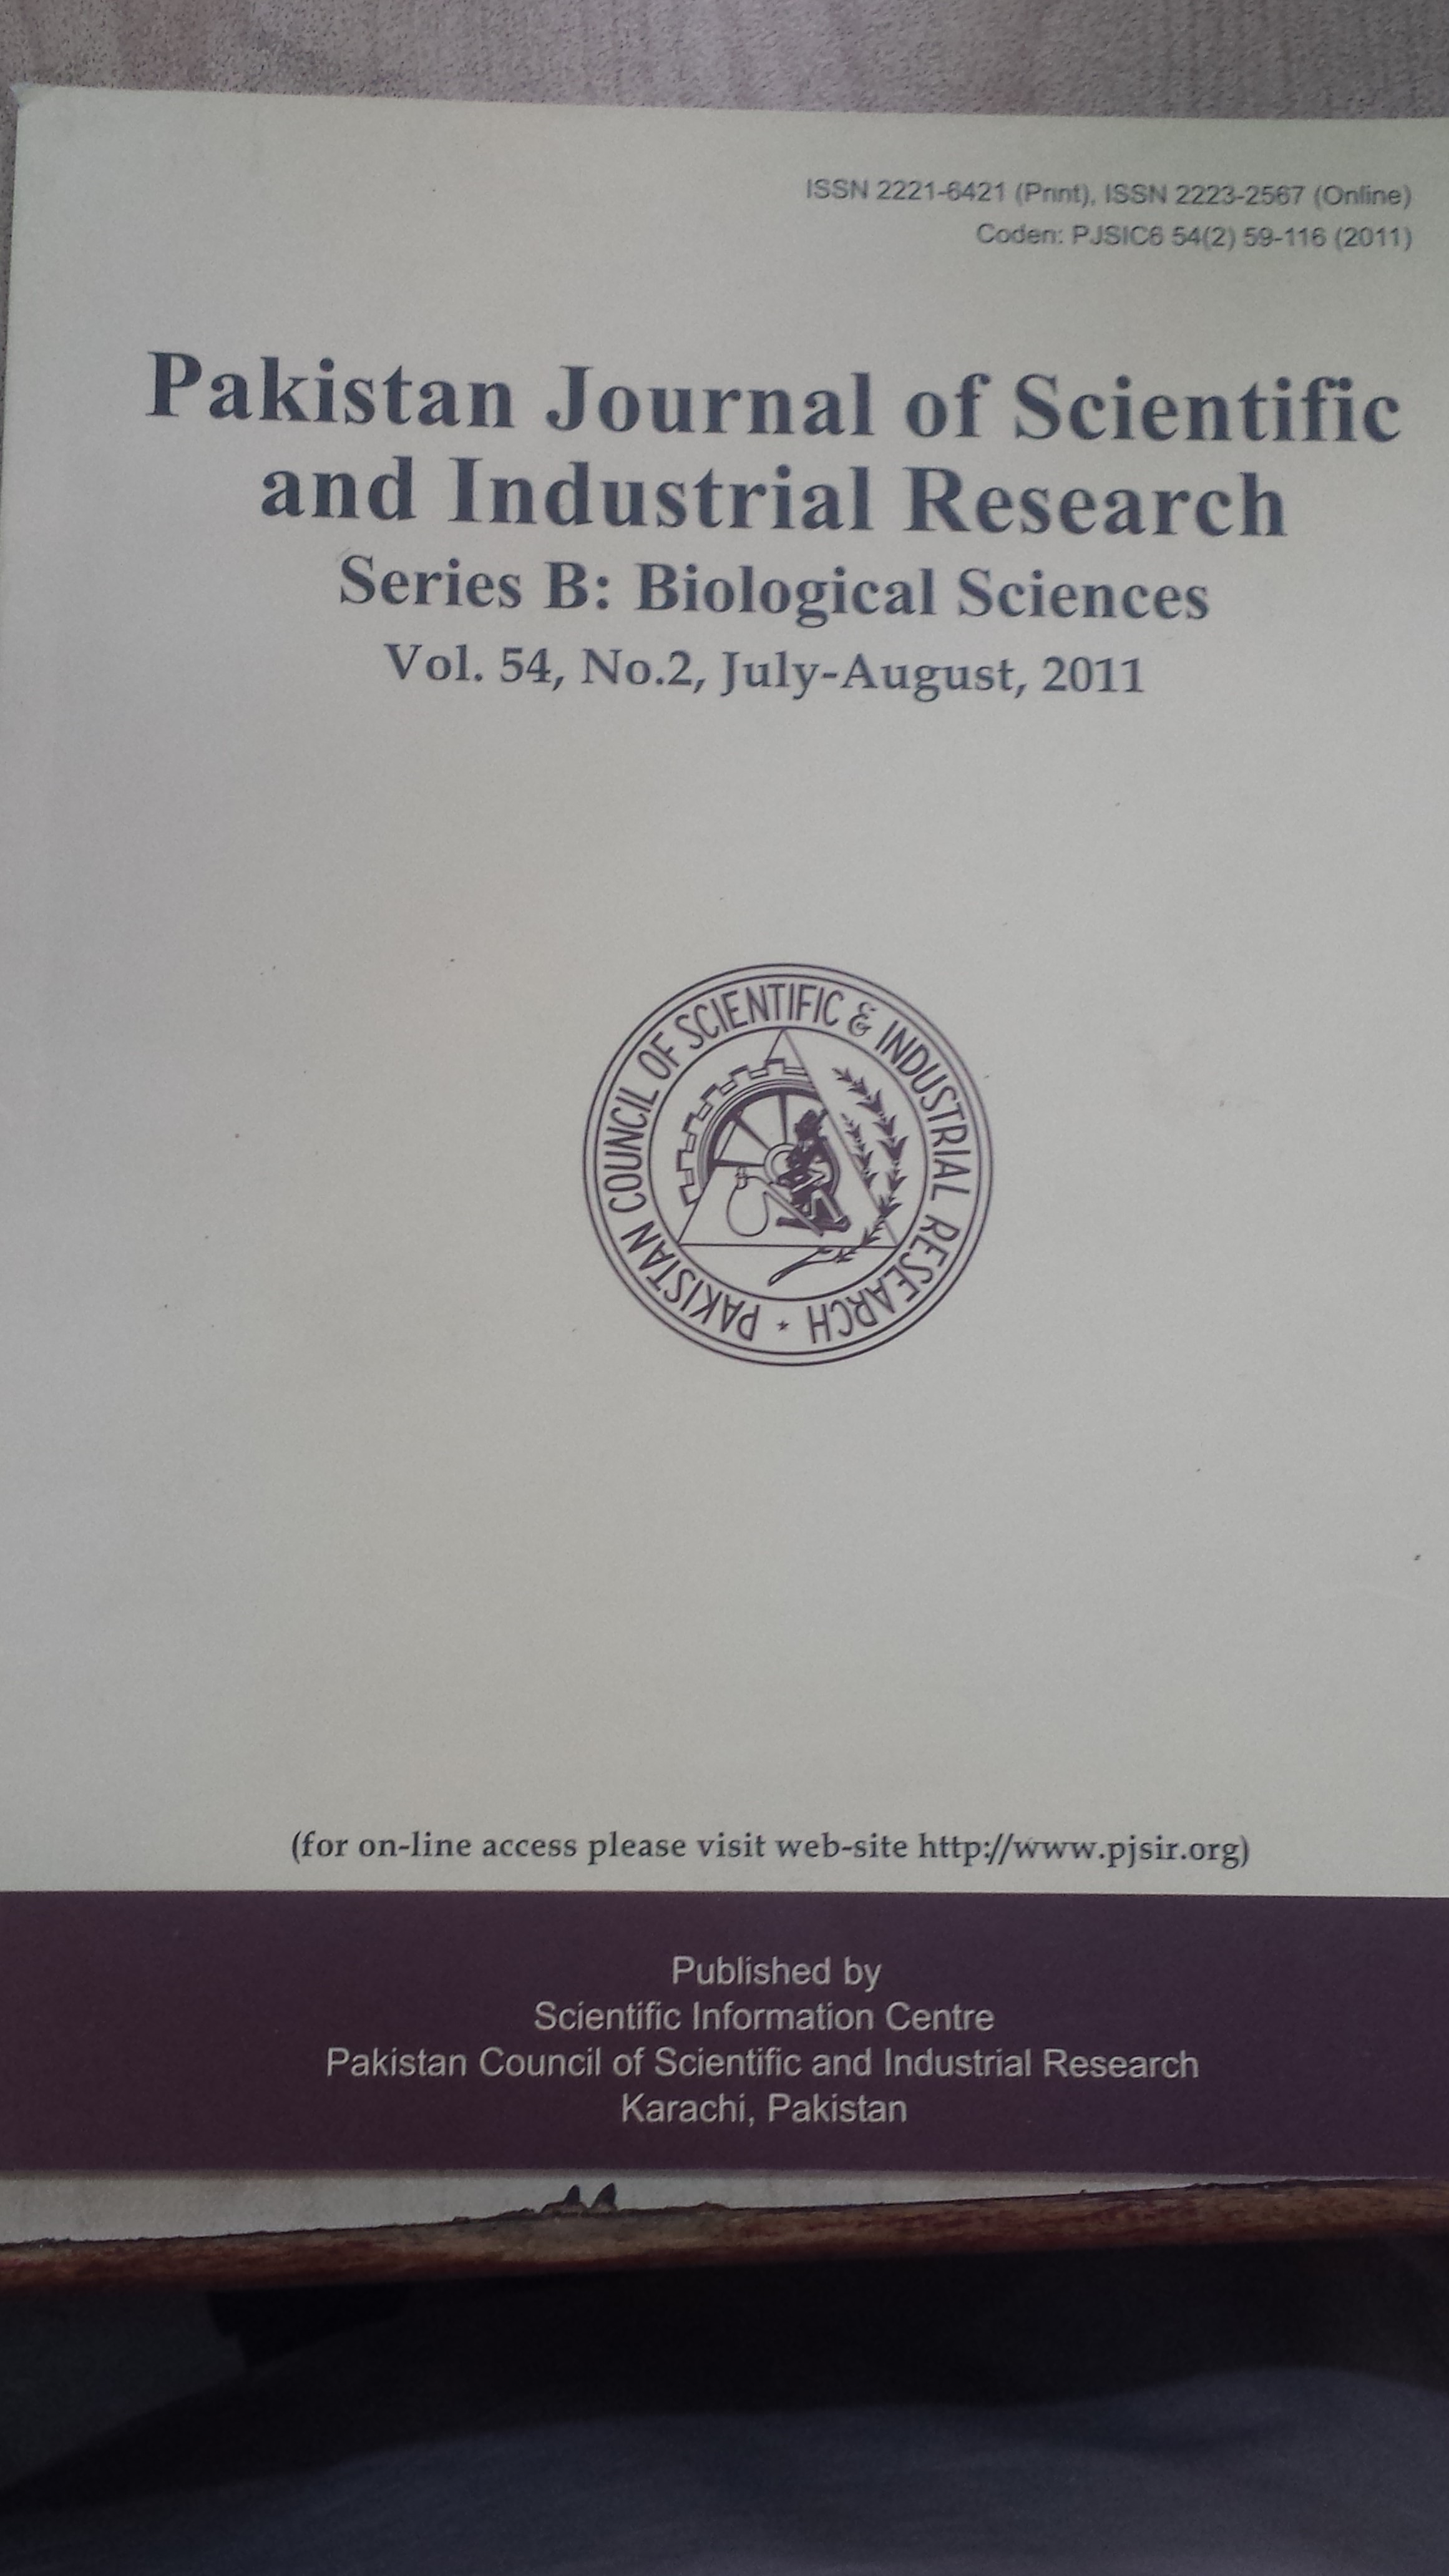 					View Vol. 54 No. 2 (2011): Pakistan Journal of Scientific and Industrial Research Series B: Biological Sciences
				